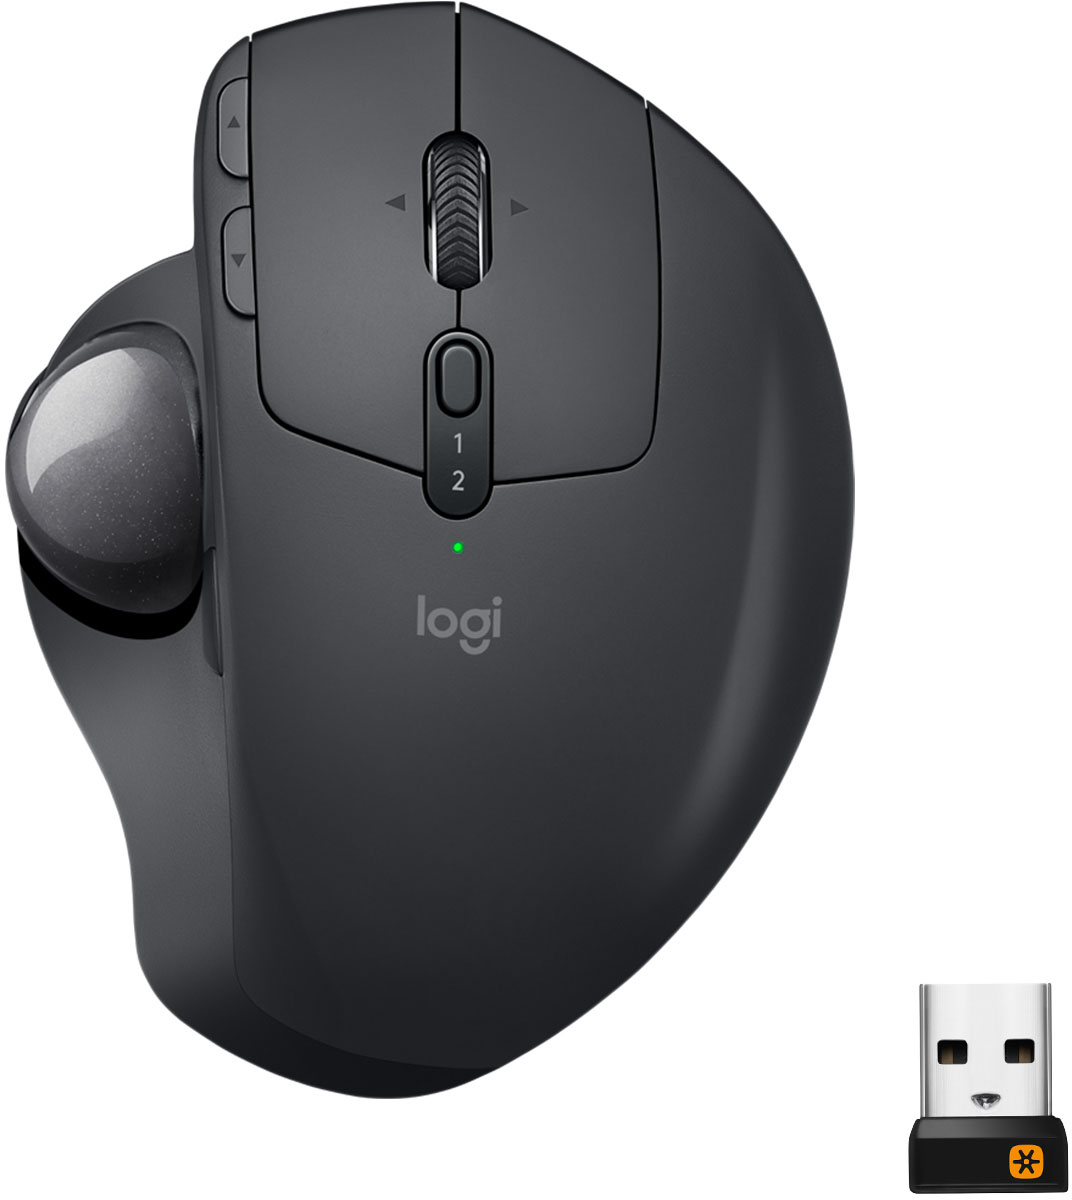 Trackball Mouse Reviews